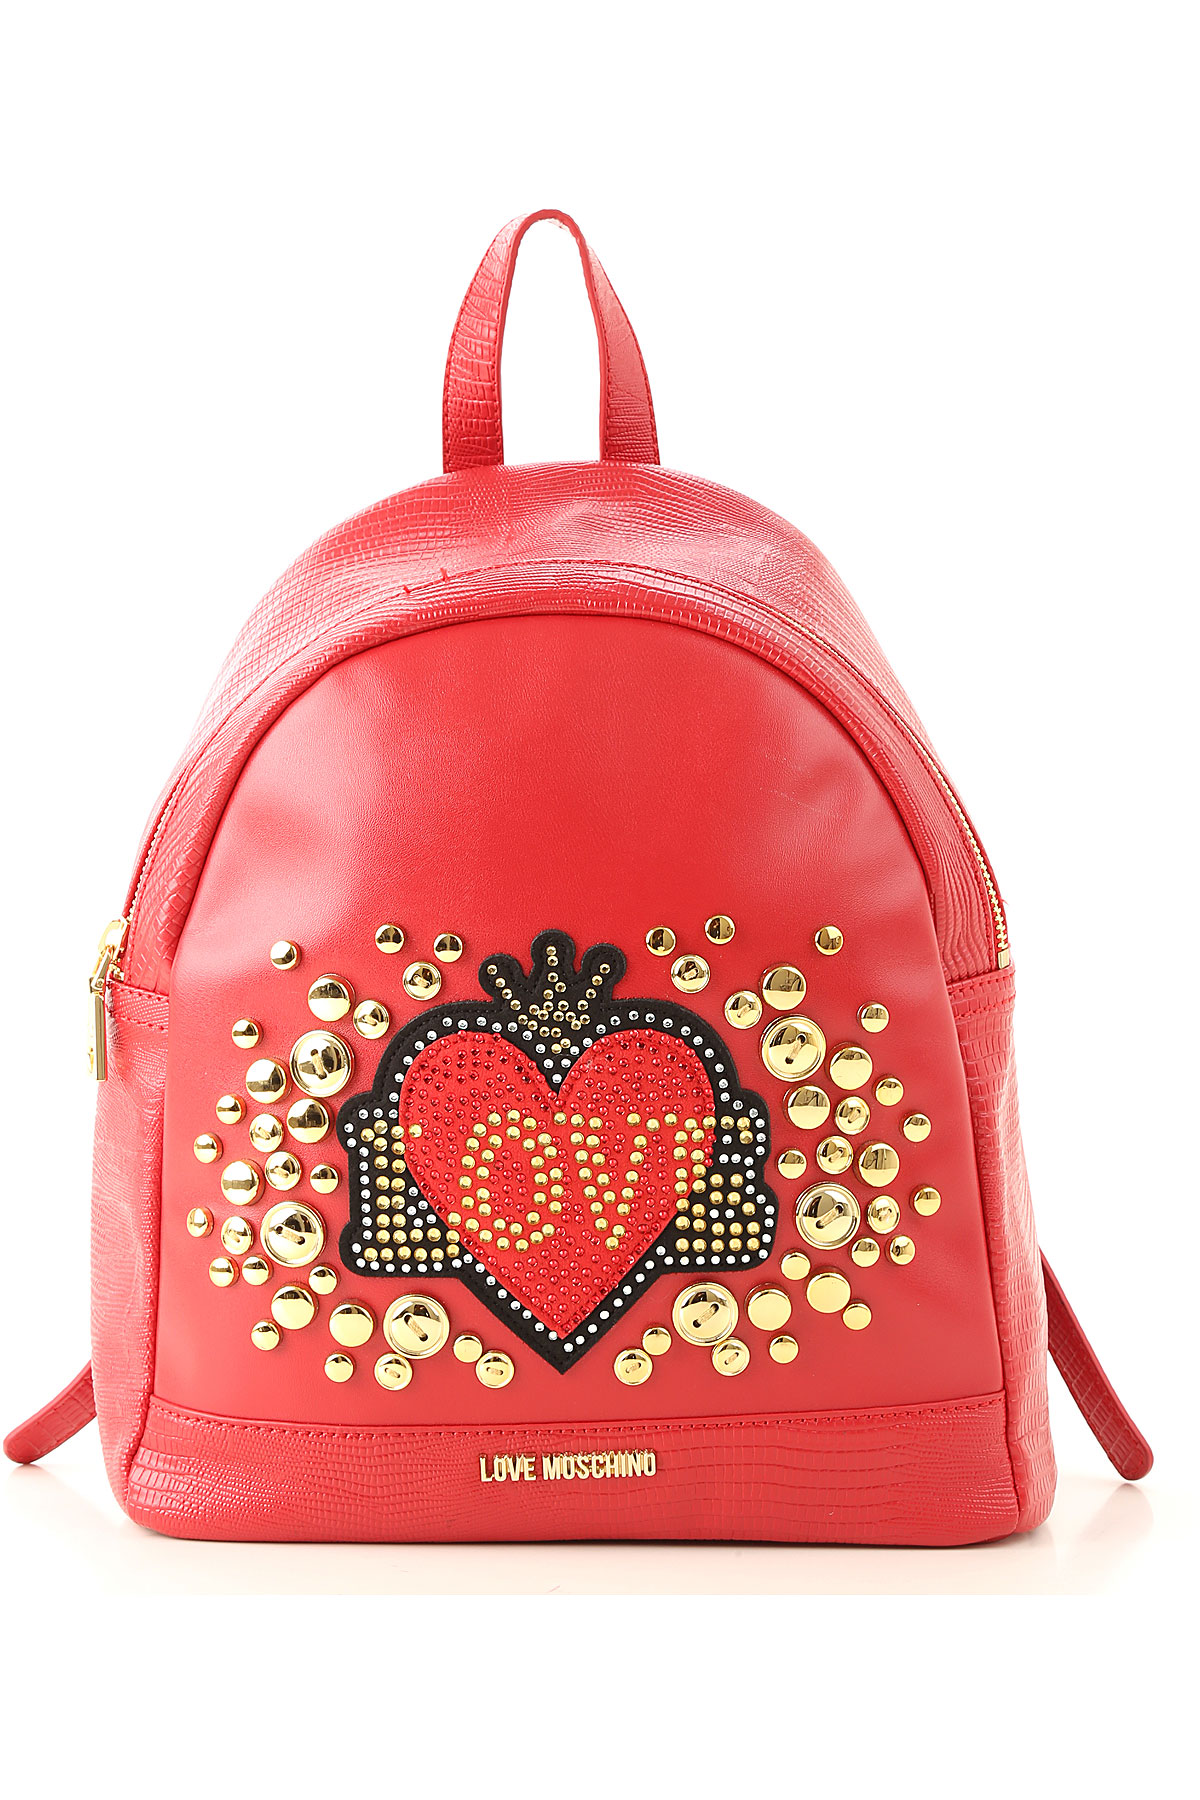 Mochilas Moschino Outlet Outlet, 56% OFF | www.logistica360.pe